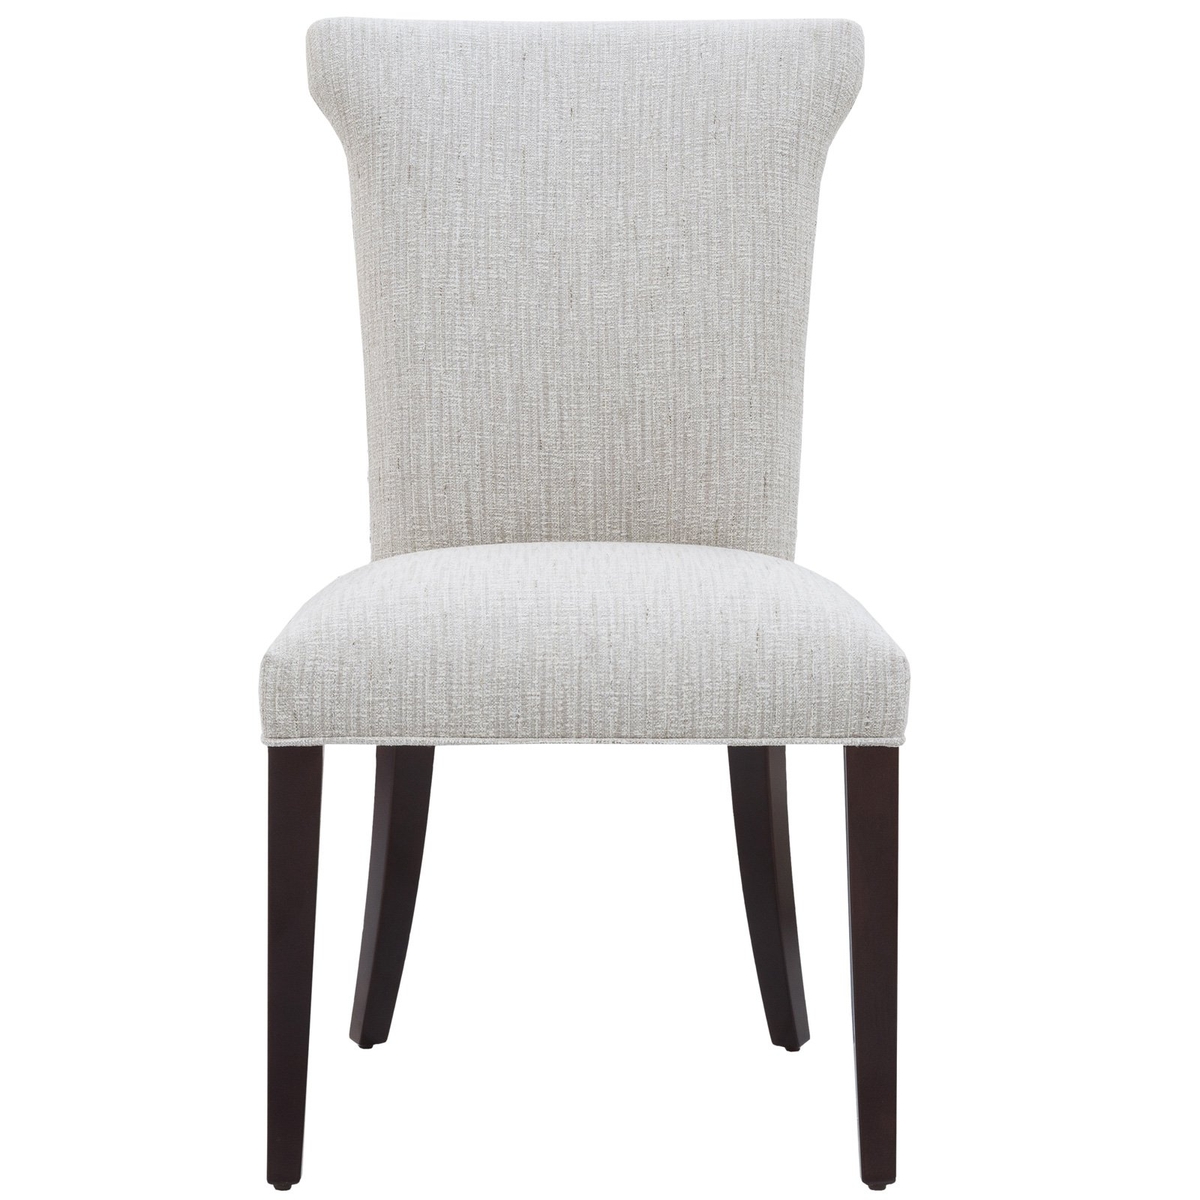 Juliet Set of 4 Dining Chairs